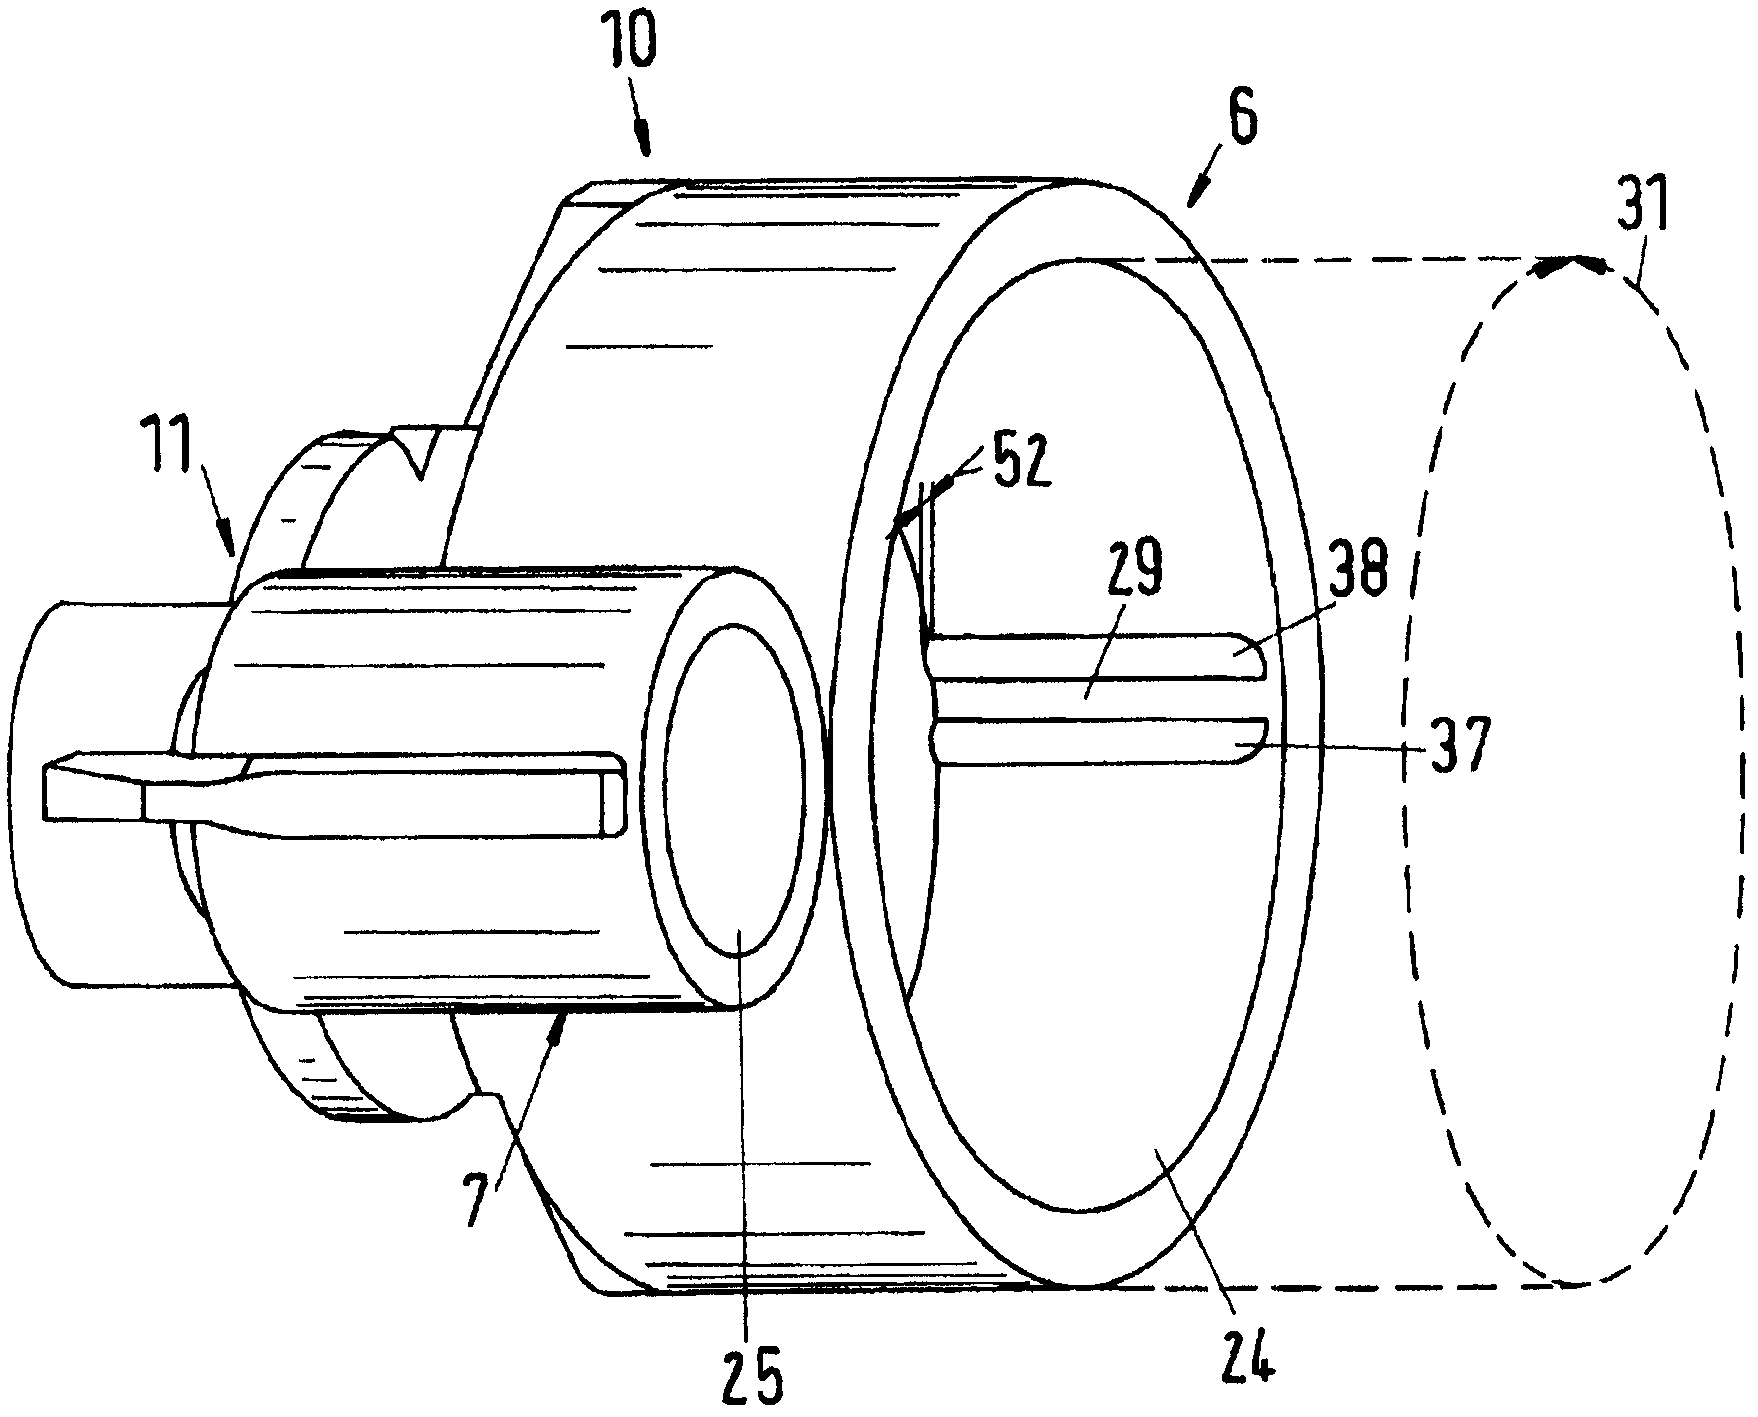 Multicomponent cartridge with venting apparatus